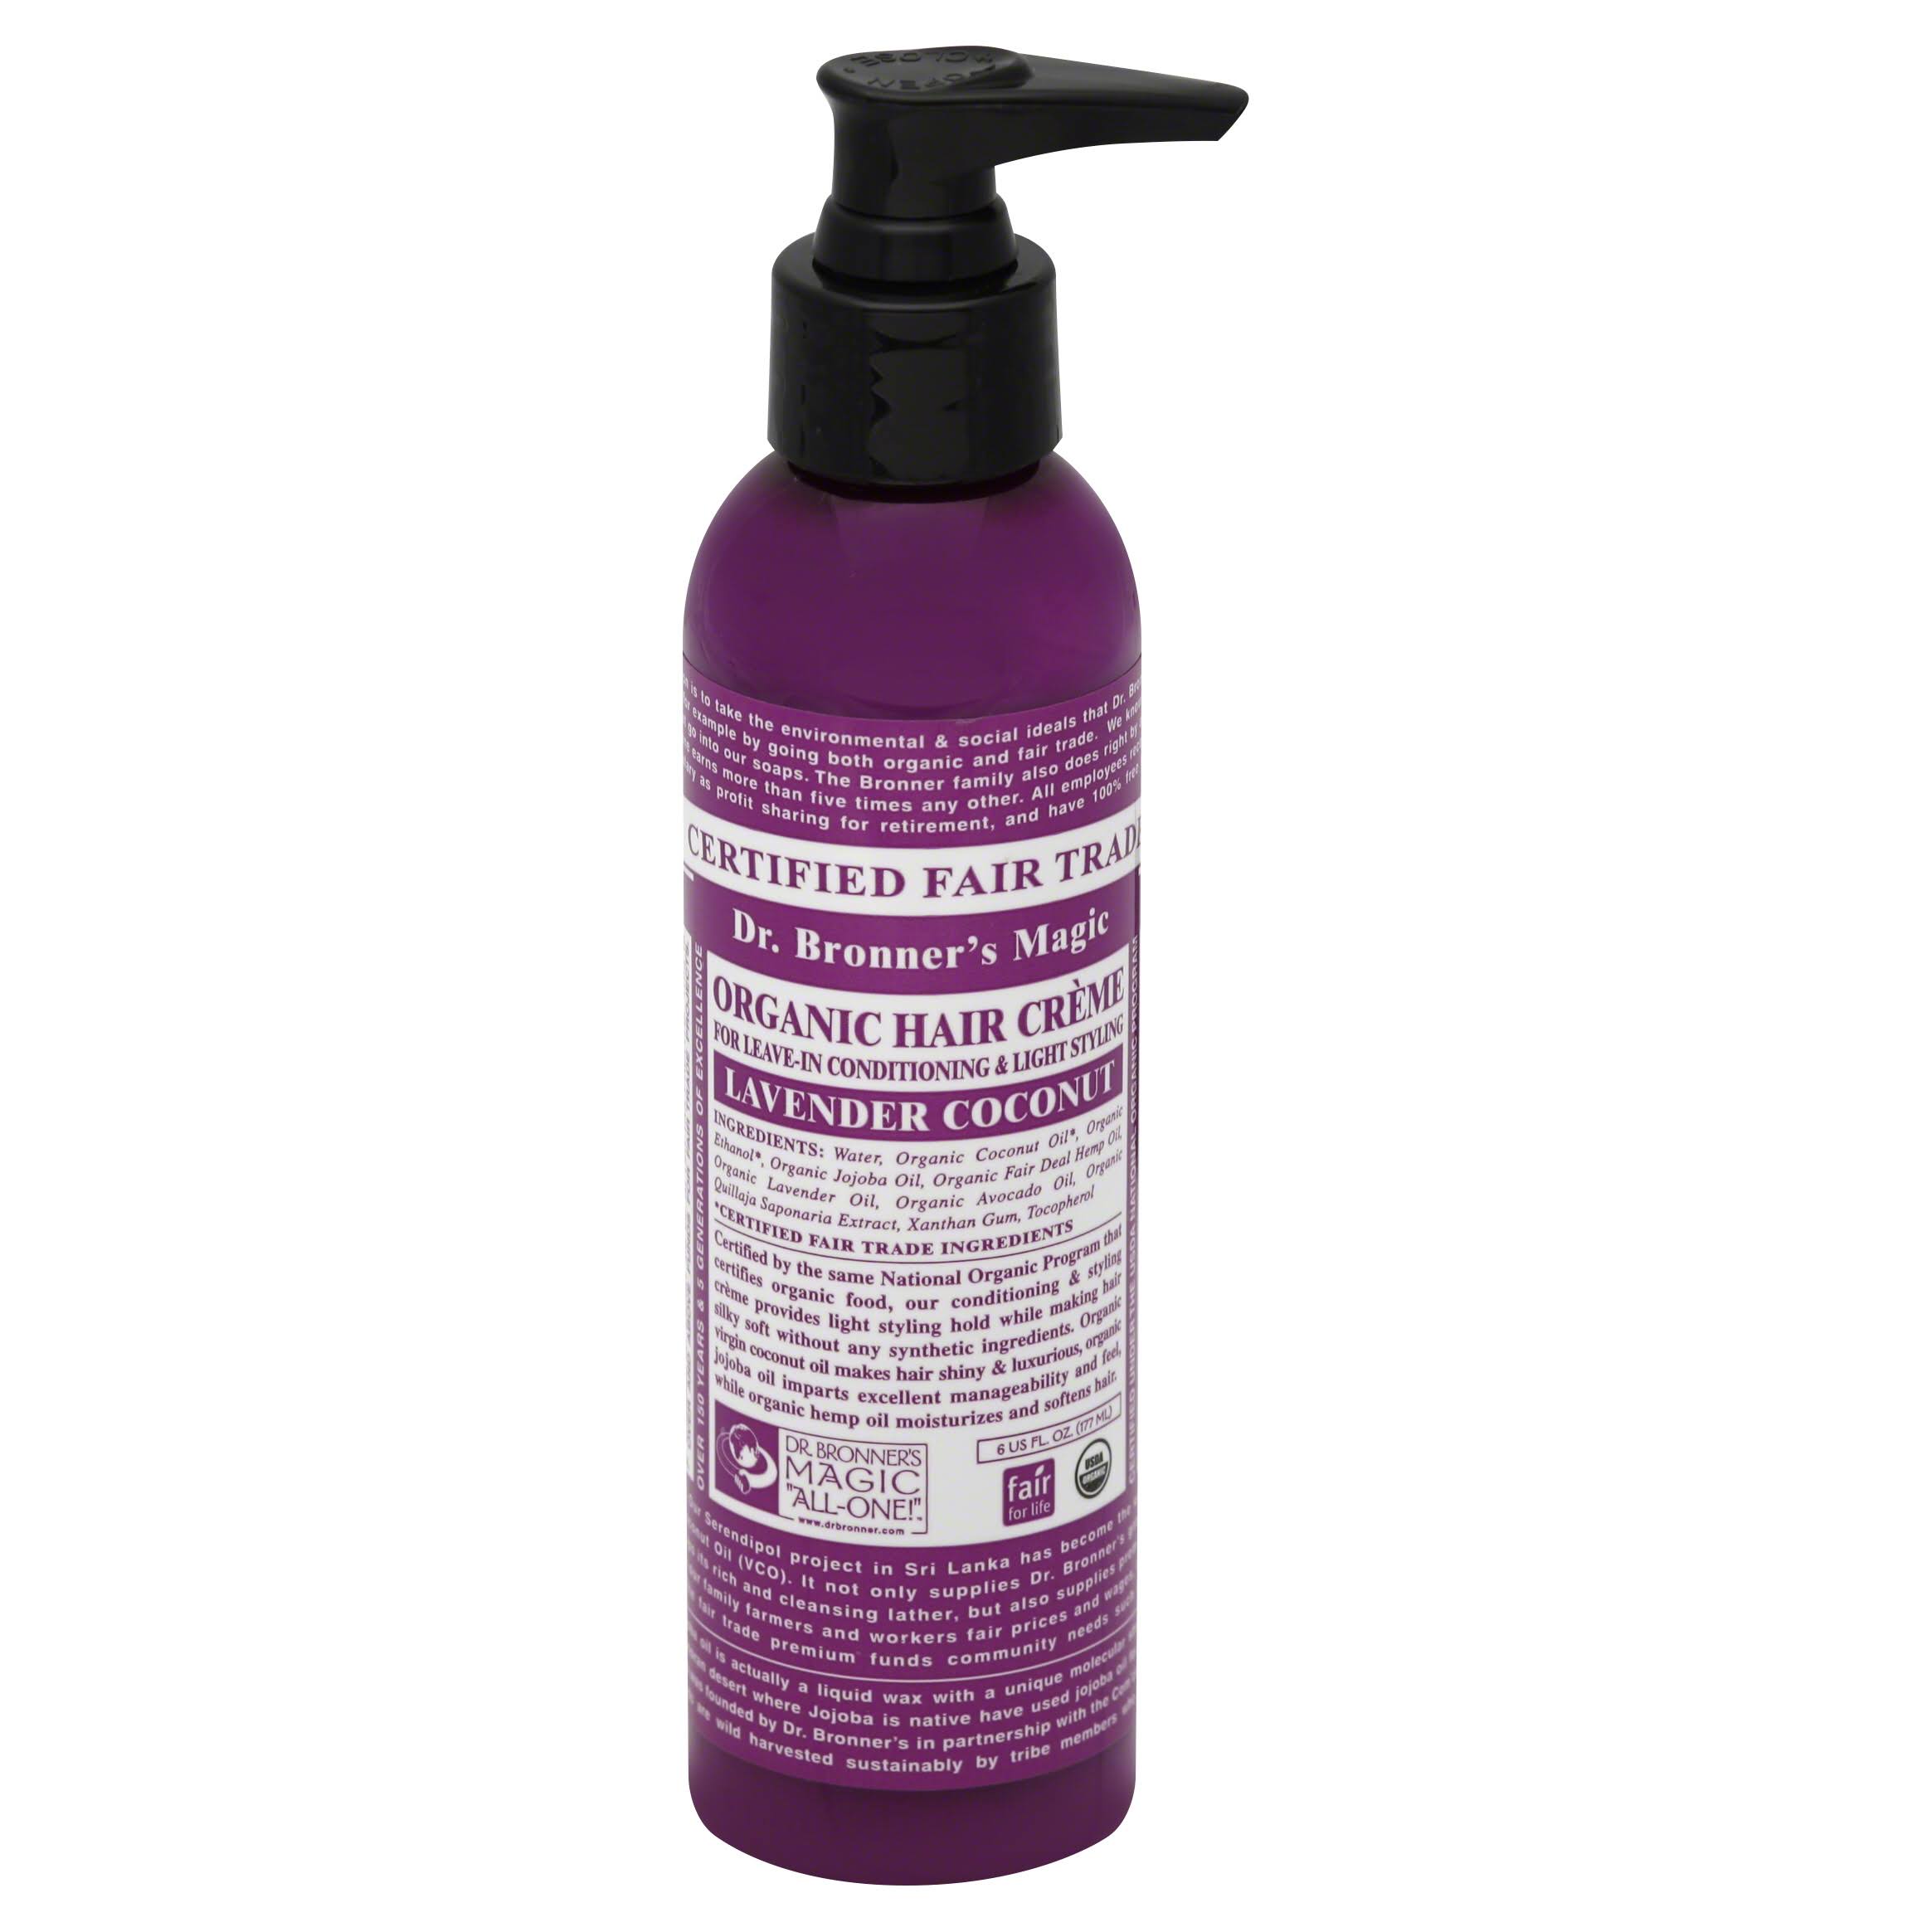 Dr Bronner Organic Hair Conditioner and Styling Creme - Lavender Coconut